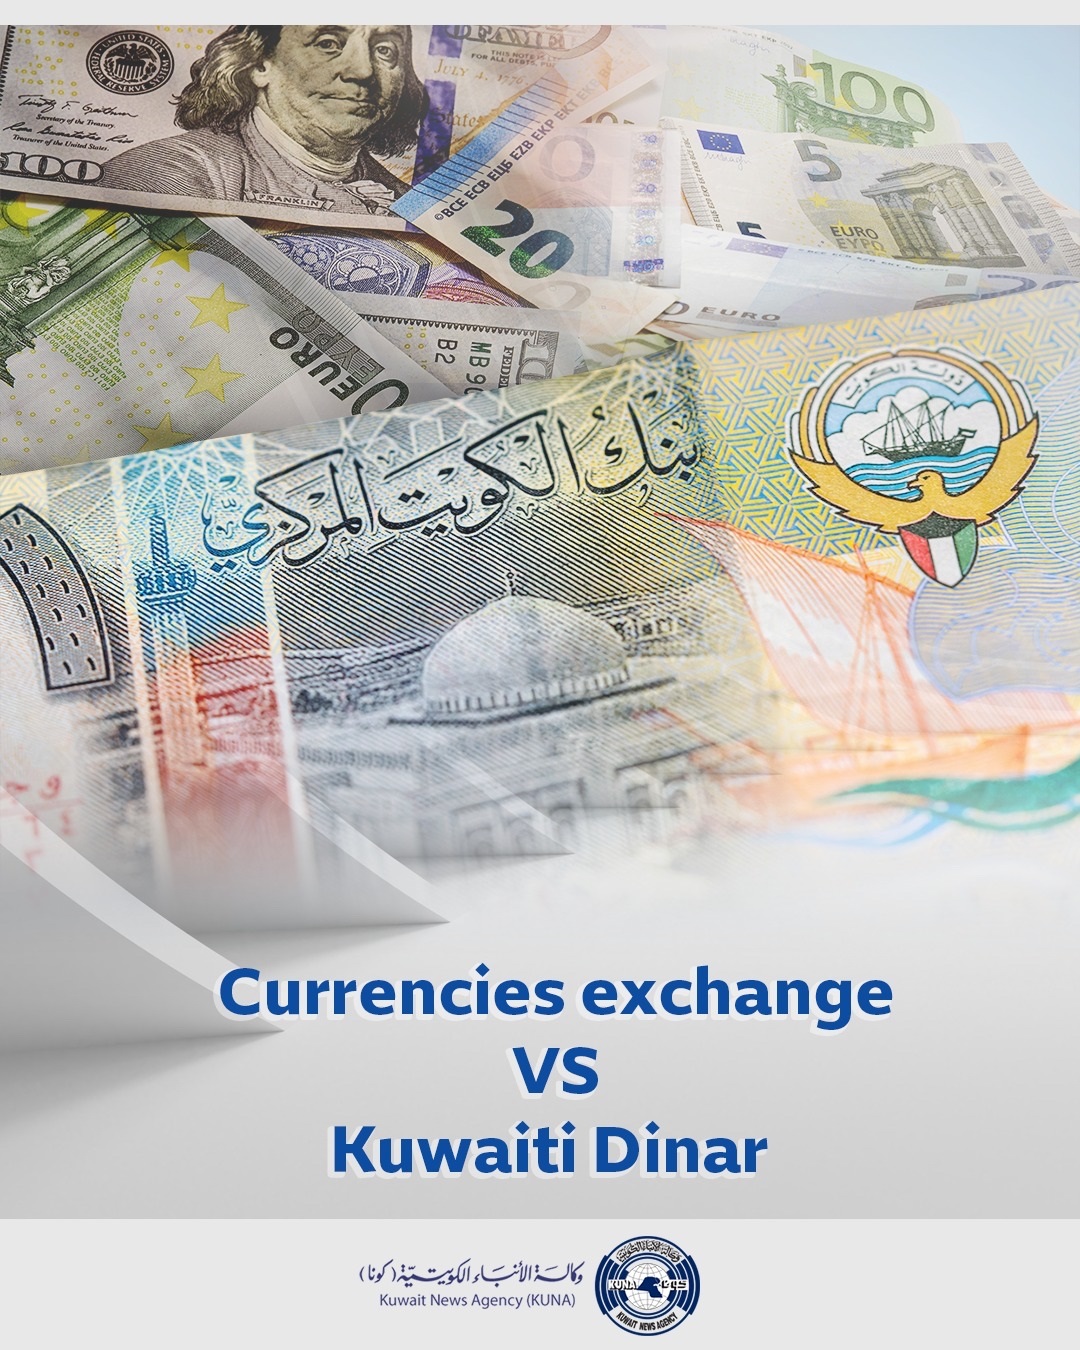 USD stable at KD 0.308, Euro down to KD 0.328                                                                                                                                                                                                             